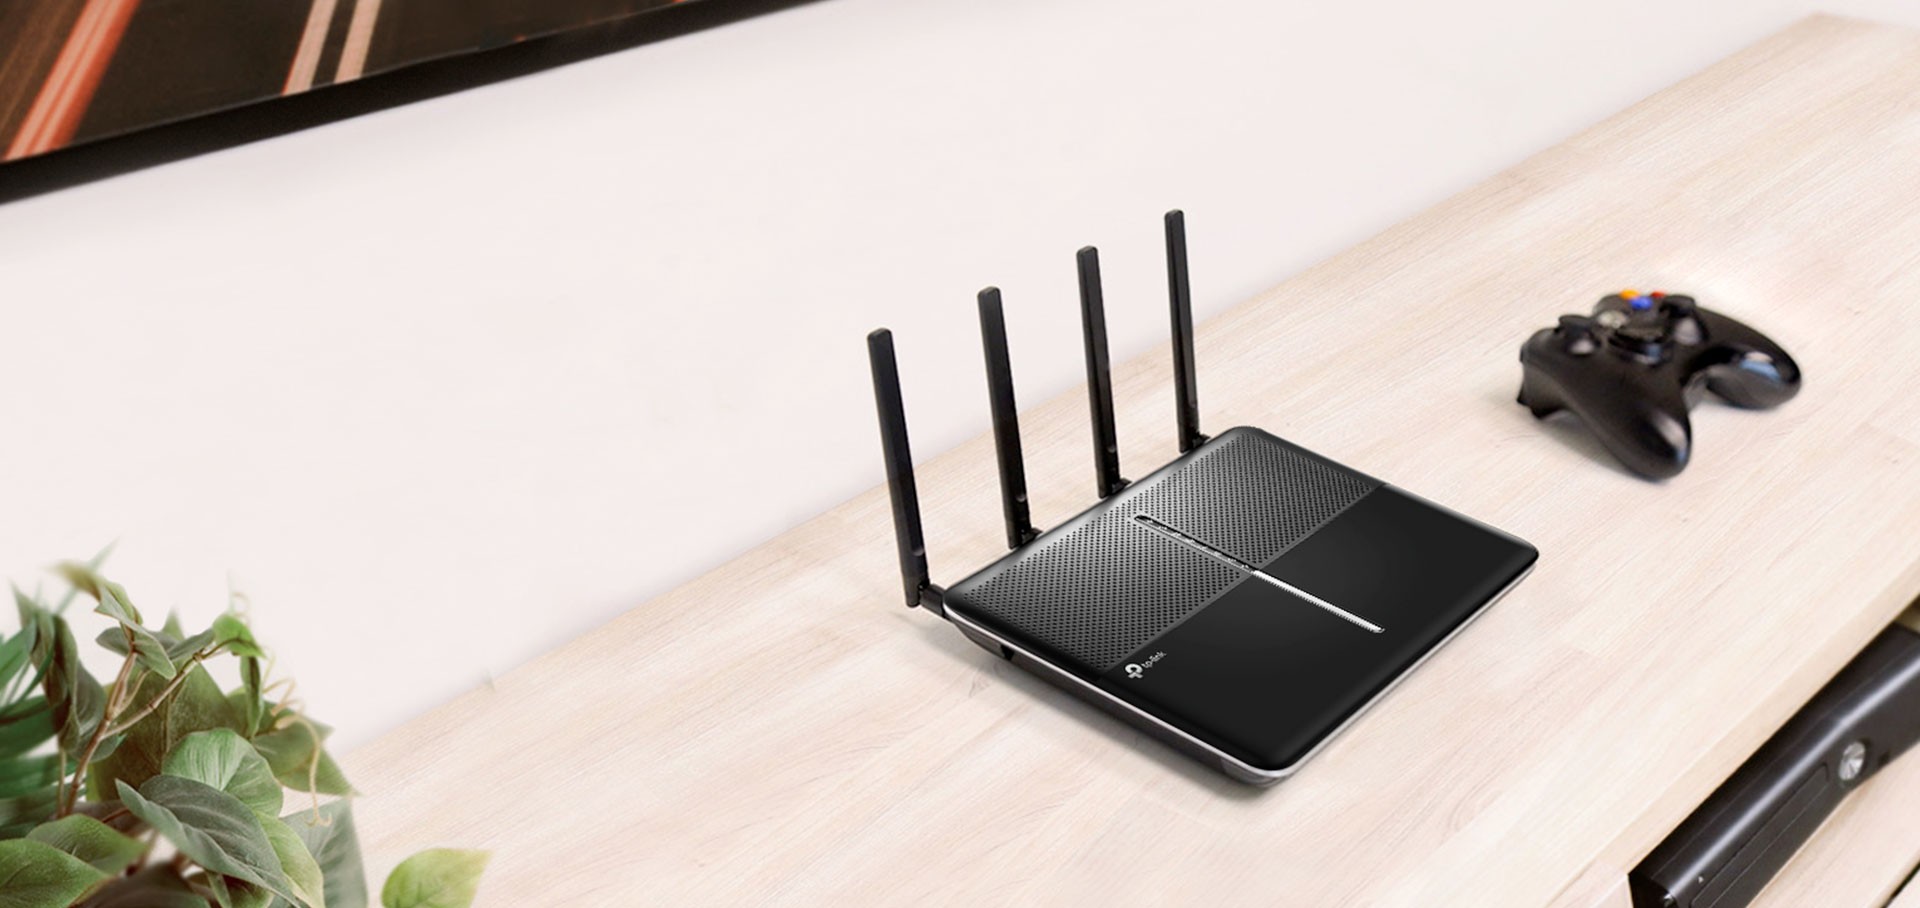 Router thiết kế thanh lịch